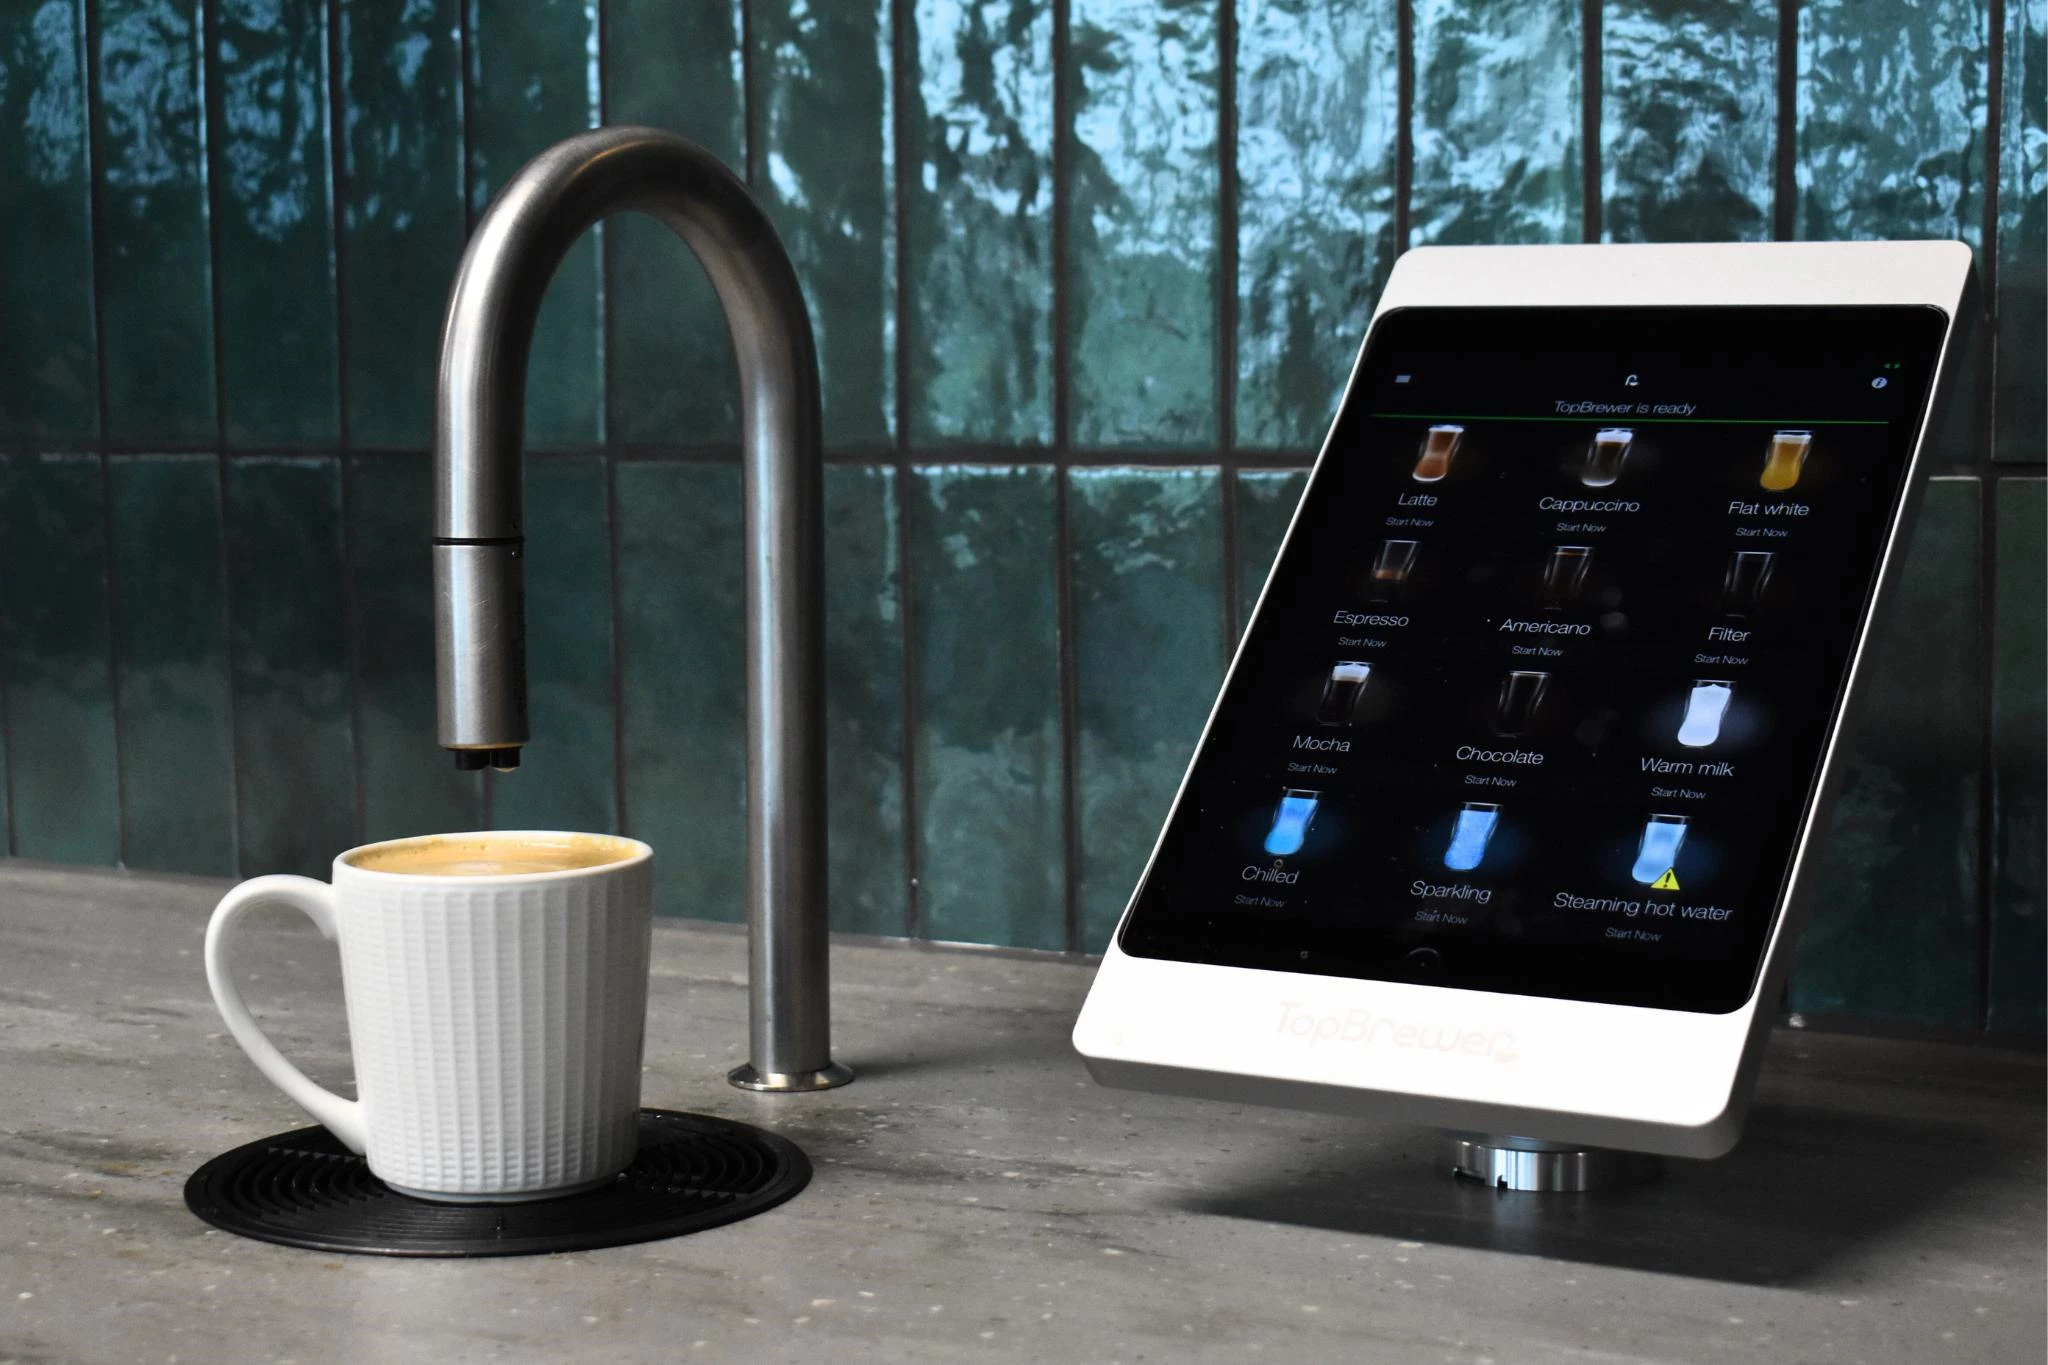 Link Spaces Coworking space with TopBrewer coffee tap machine, iPad and Latte